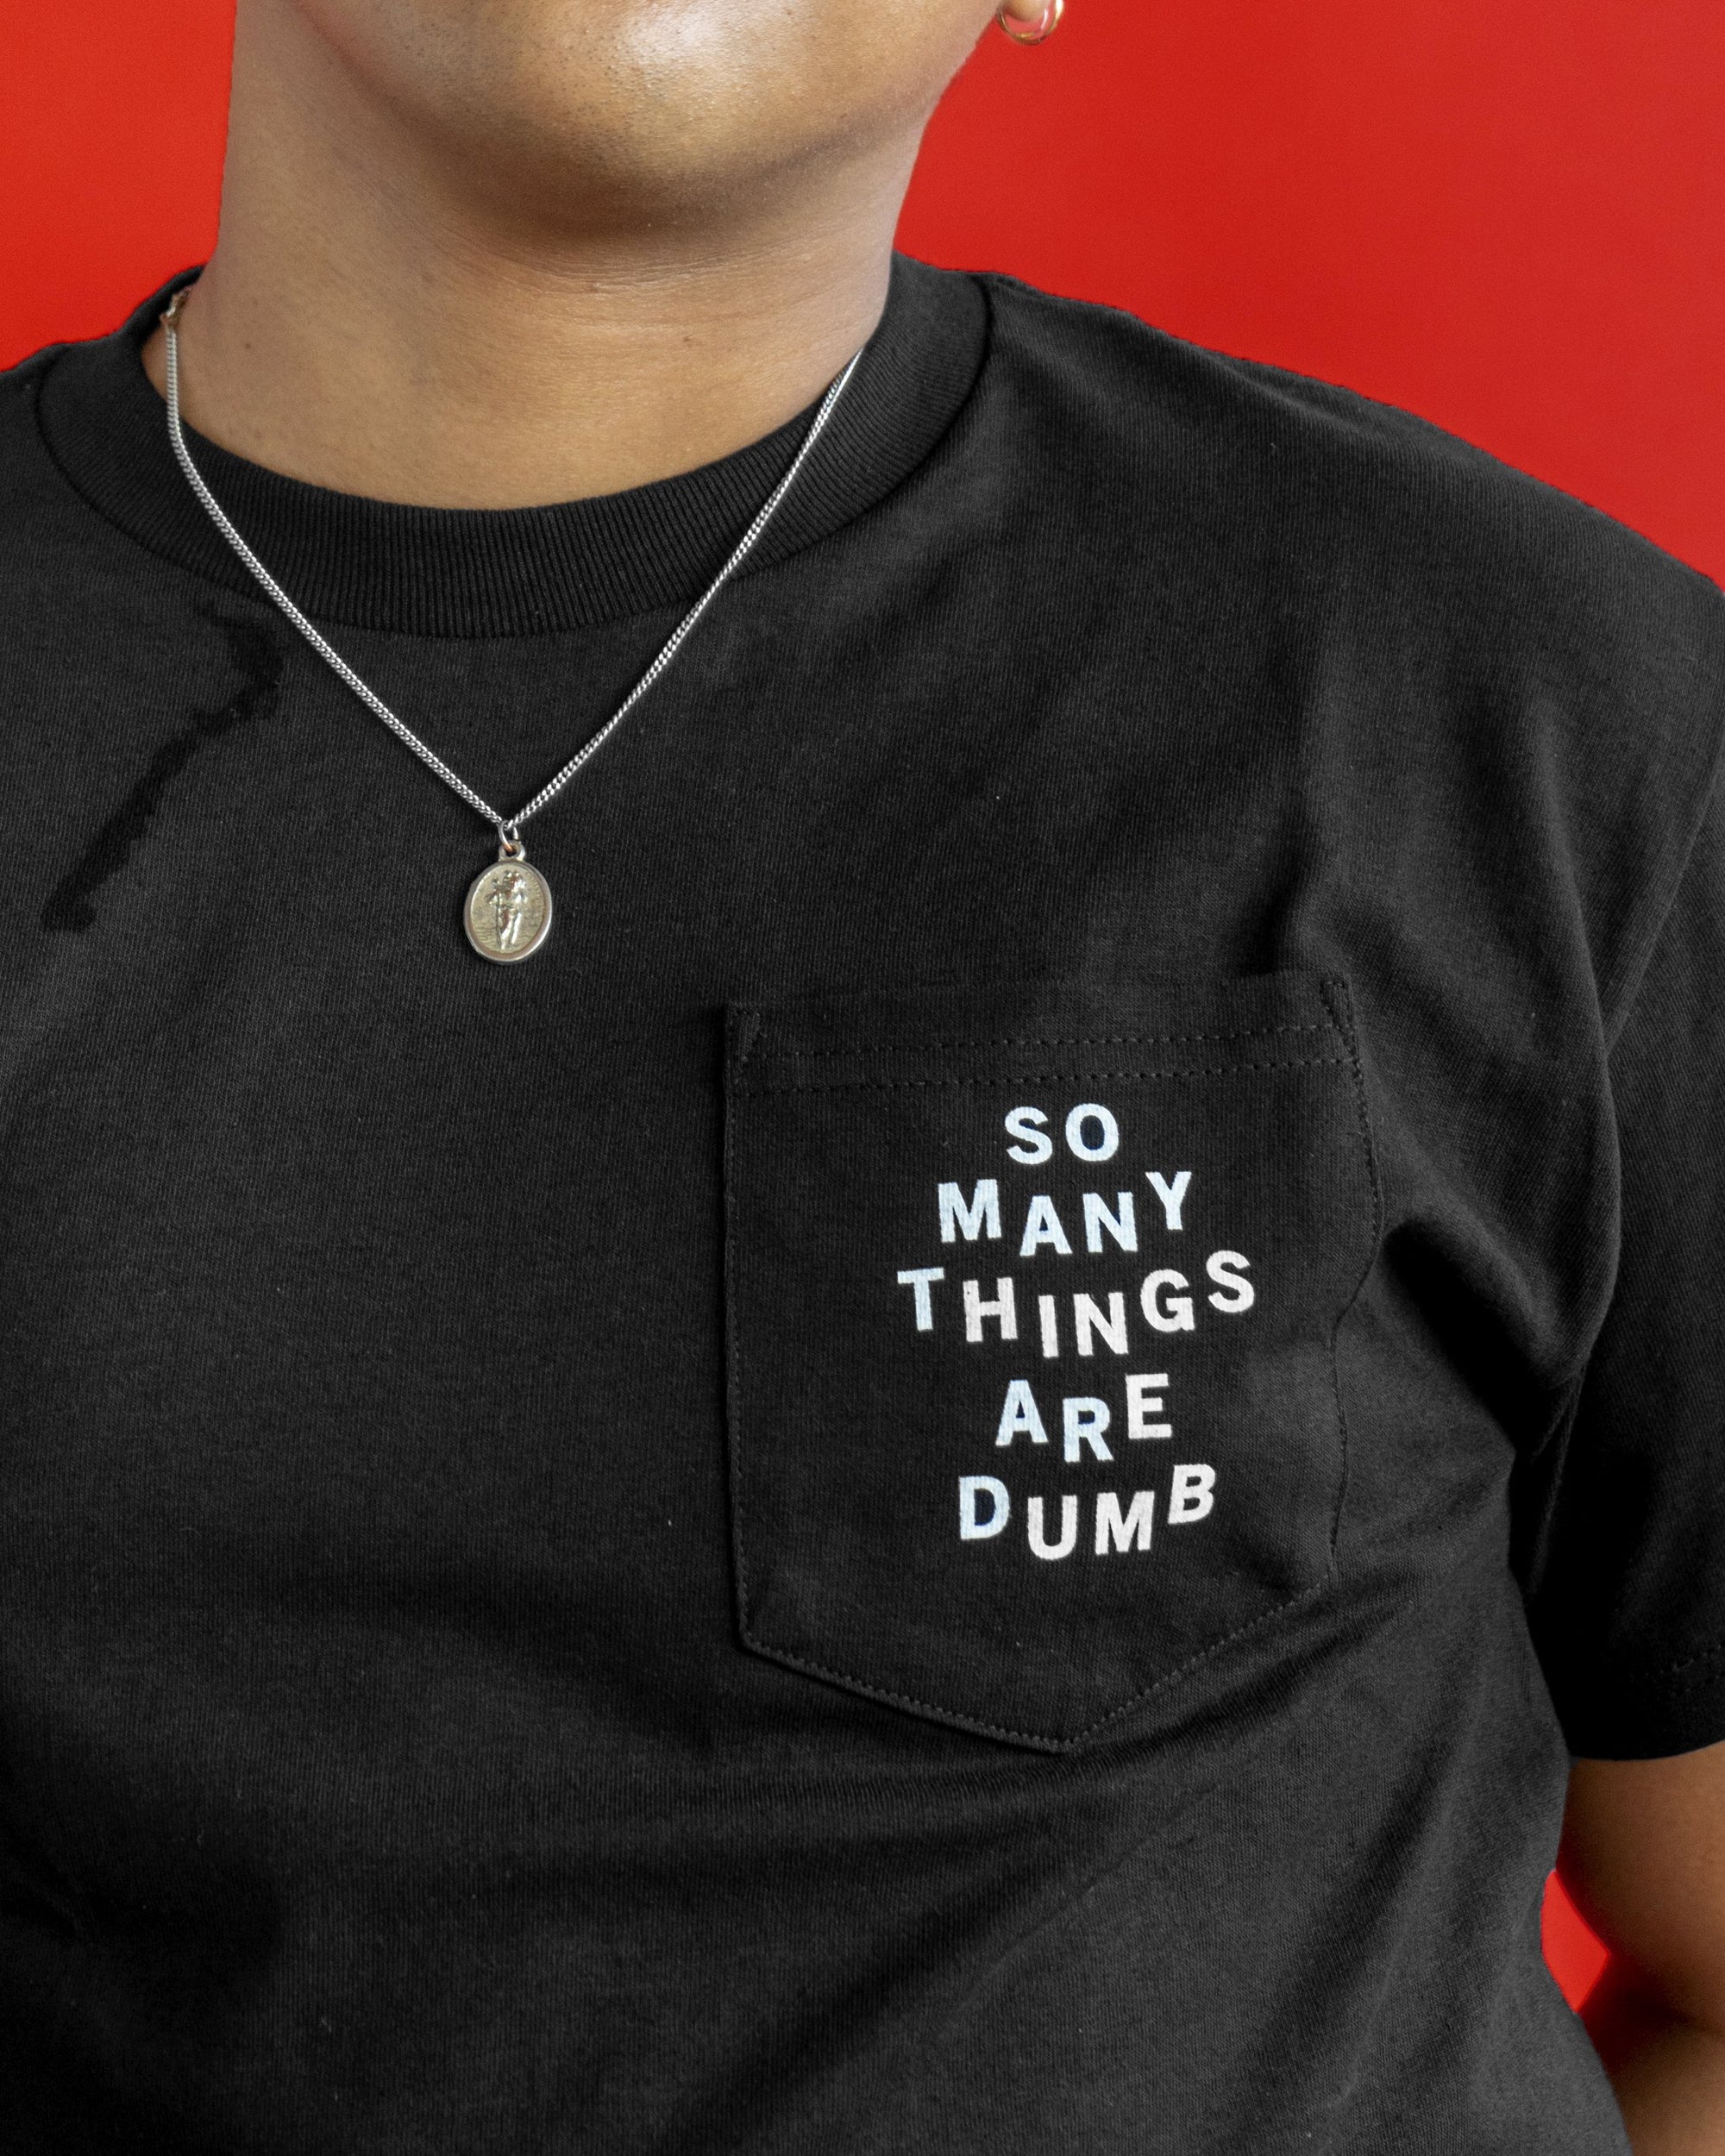 A male model wearing the original NO FUN® "So Many Things Are Dumb" Pocket tee, designed and printed in Toronto. T-shirt features front pocket and white text that reads "SO MANY THINGS ARE DUMB".